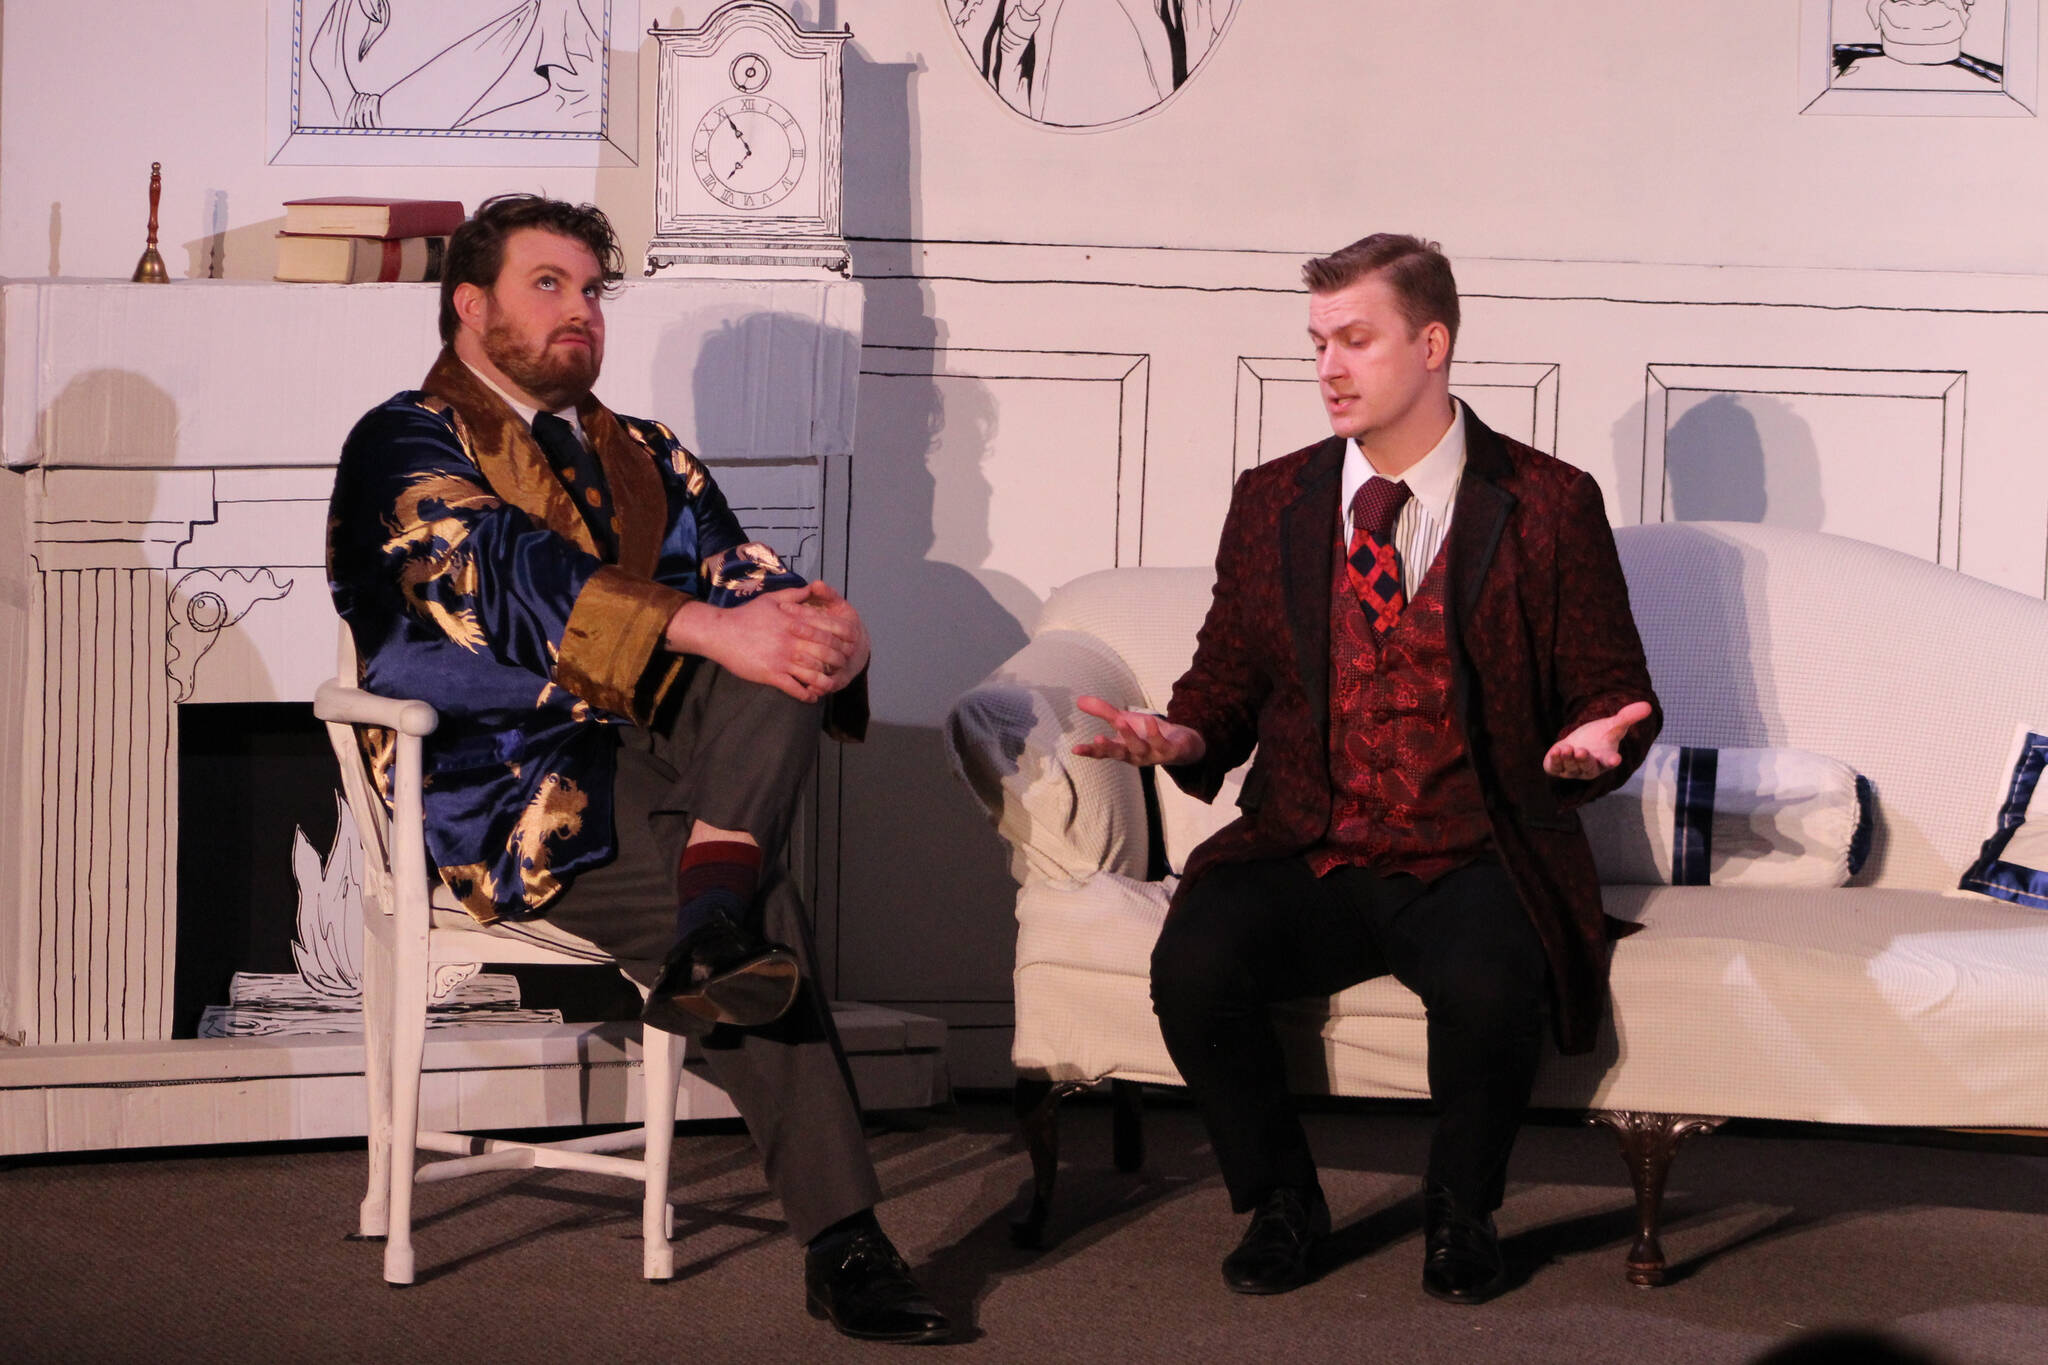 Joe Spady as Algnernon Moncrieff, left, and Devin Boyle as Jack Worthing rehearse a scene from the Kenai Performers’ production of “The Importance of Being Earnest” on Wednesday, May 4, 2022, in Kalifornsky, Alaska. (Photo courtesy Kenai Performers)